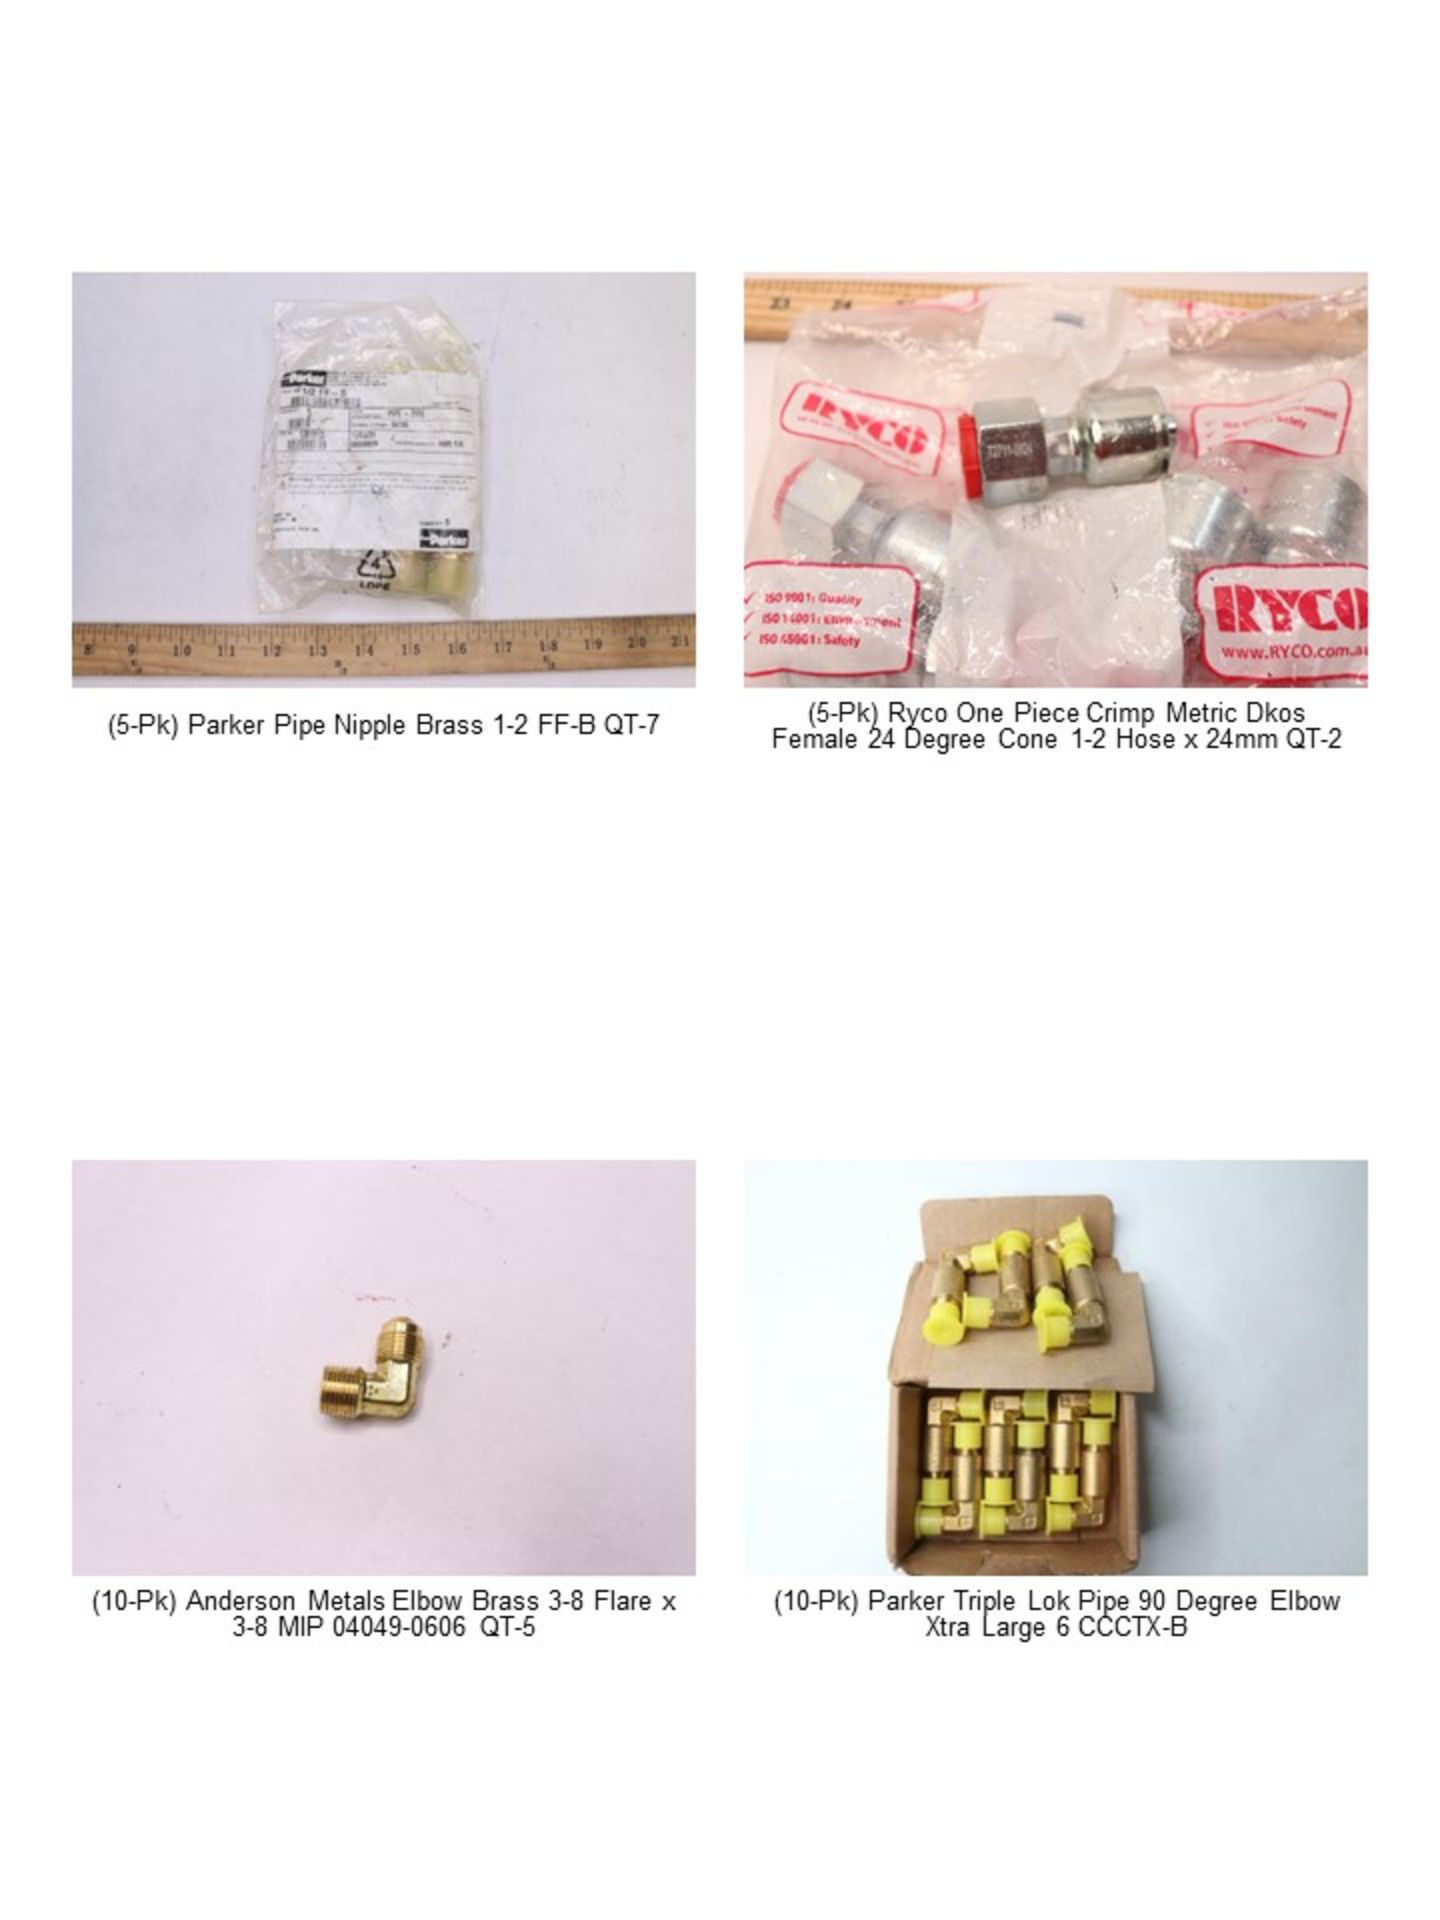 {LOT} 50k Retail Value of Plumbing Items with 490 SKU's and 2000+ Piece Quantity - Mostly New In